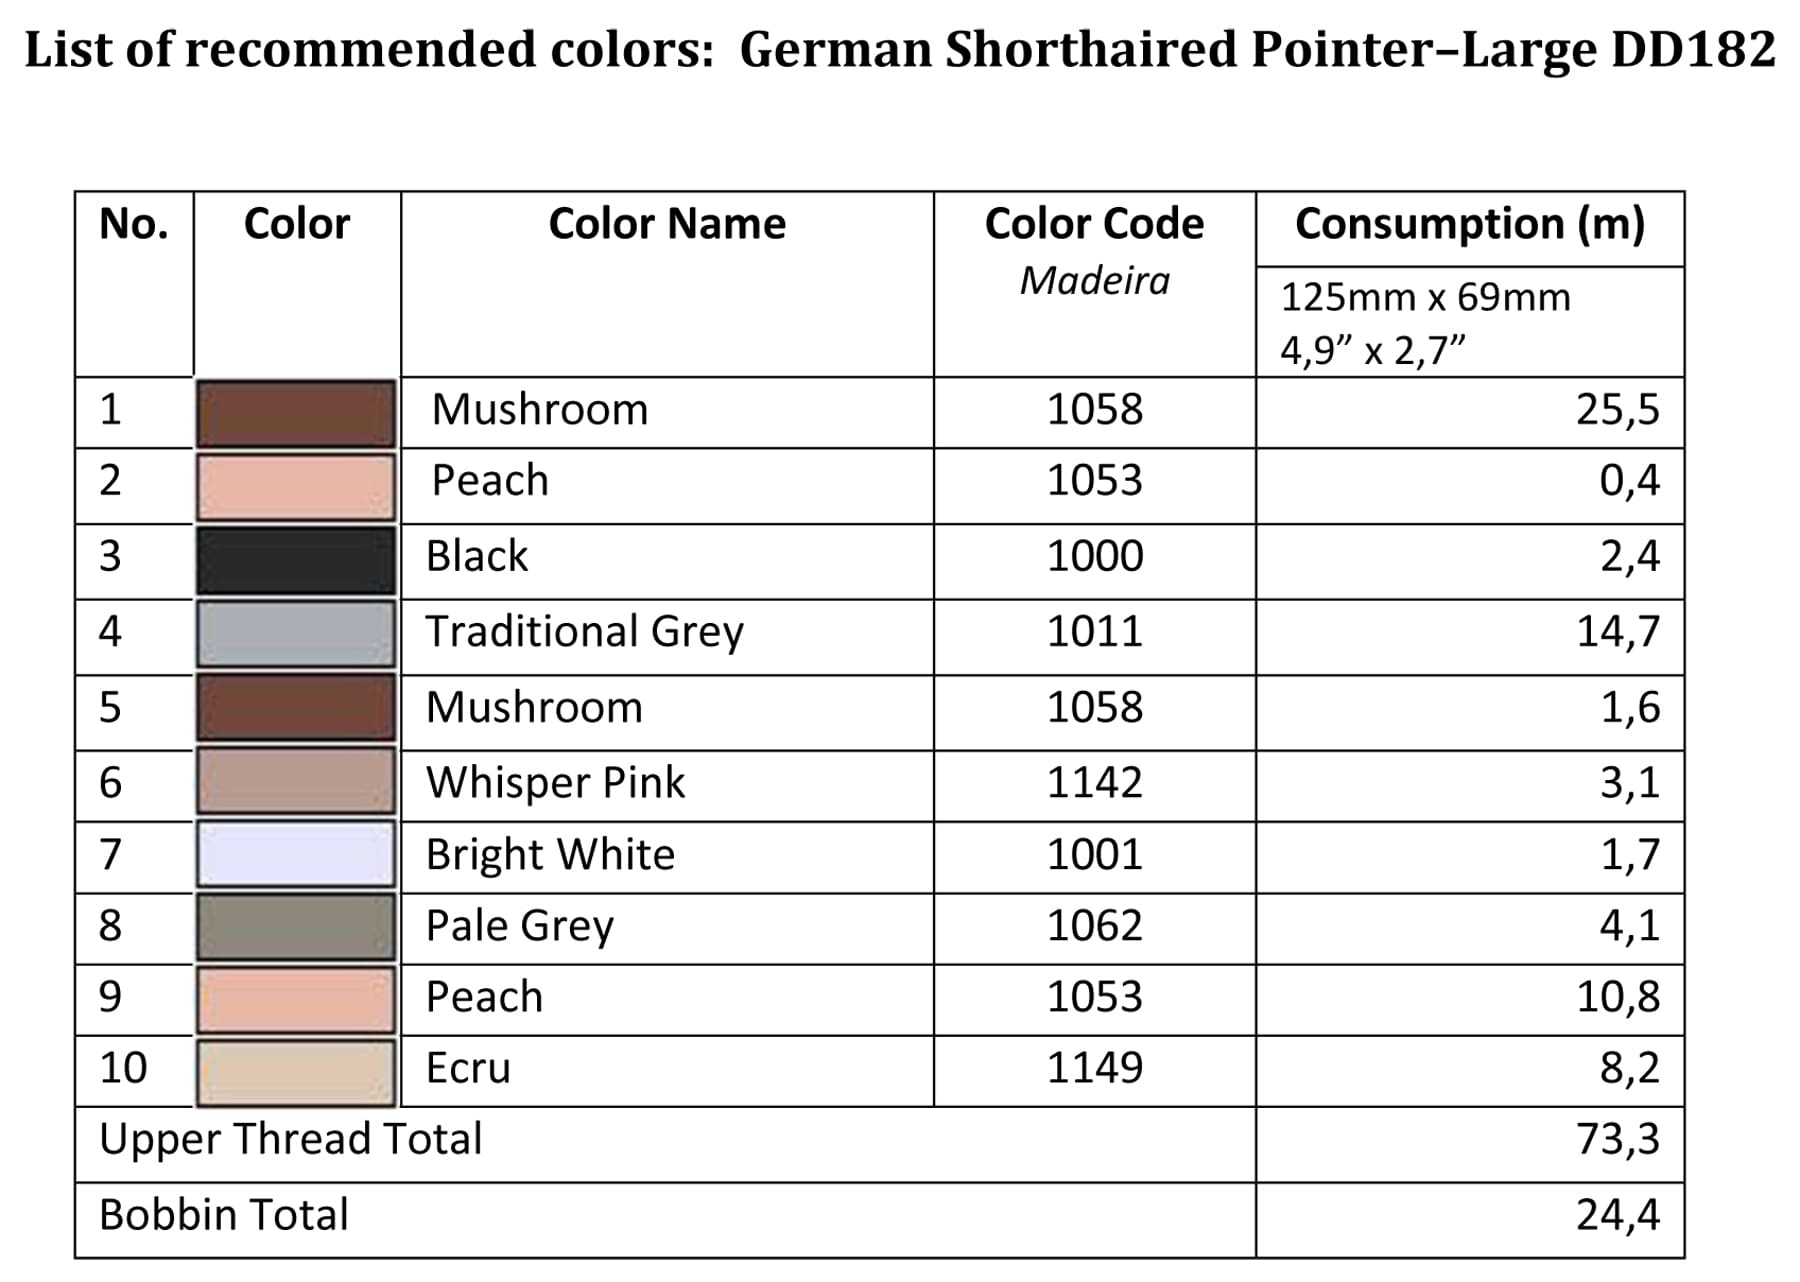 List of recommended colors - LargeDD182